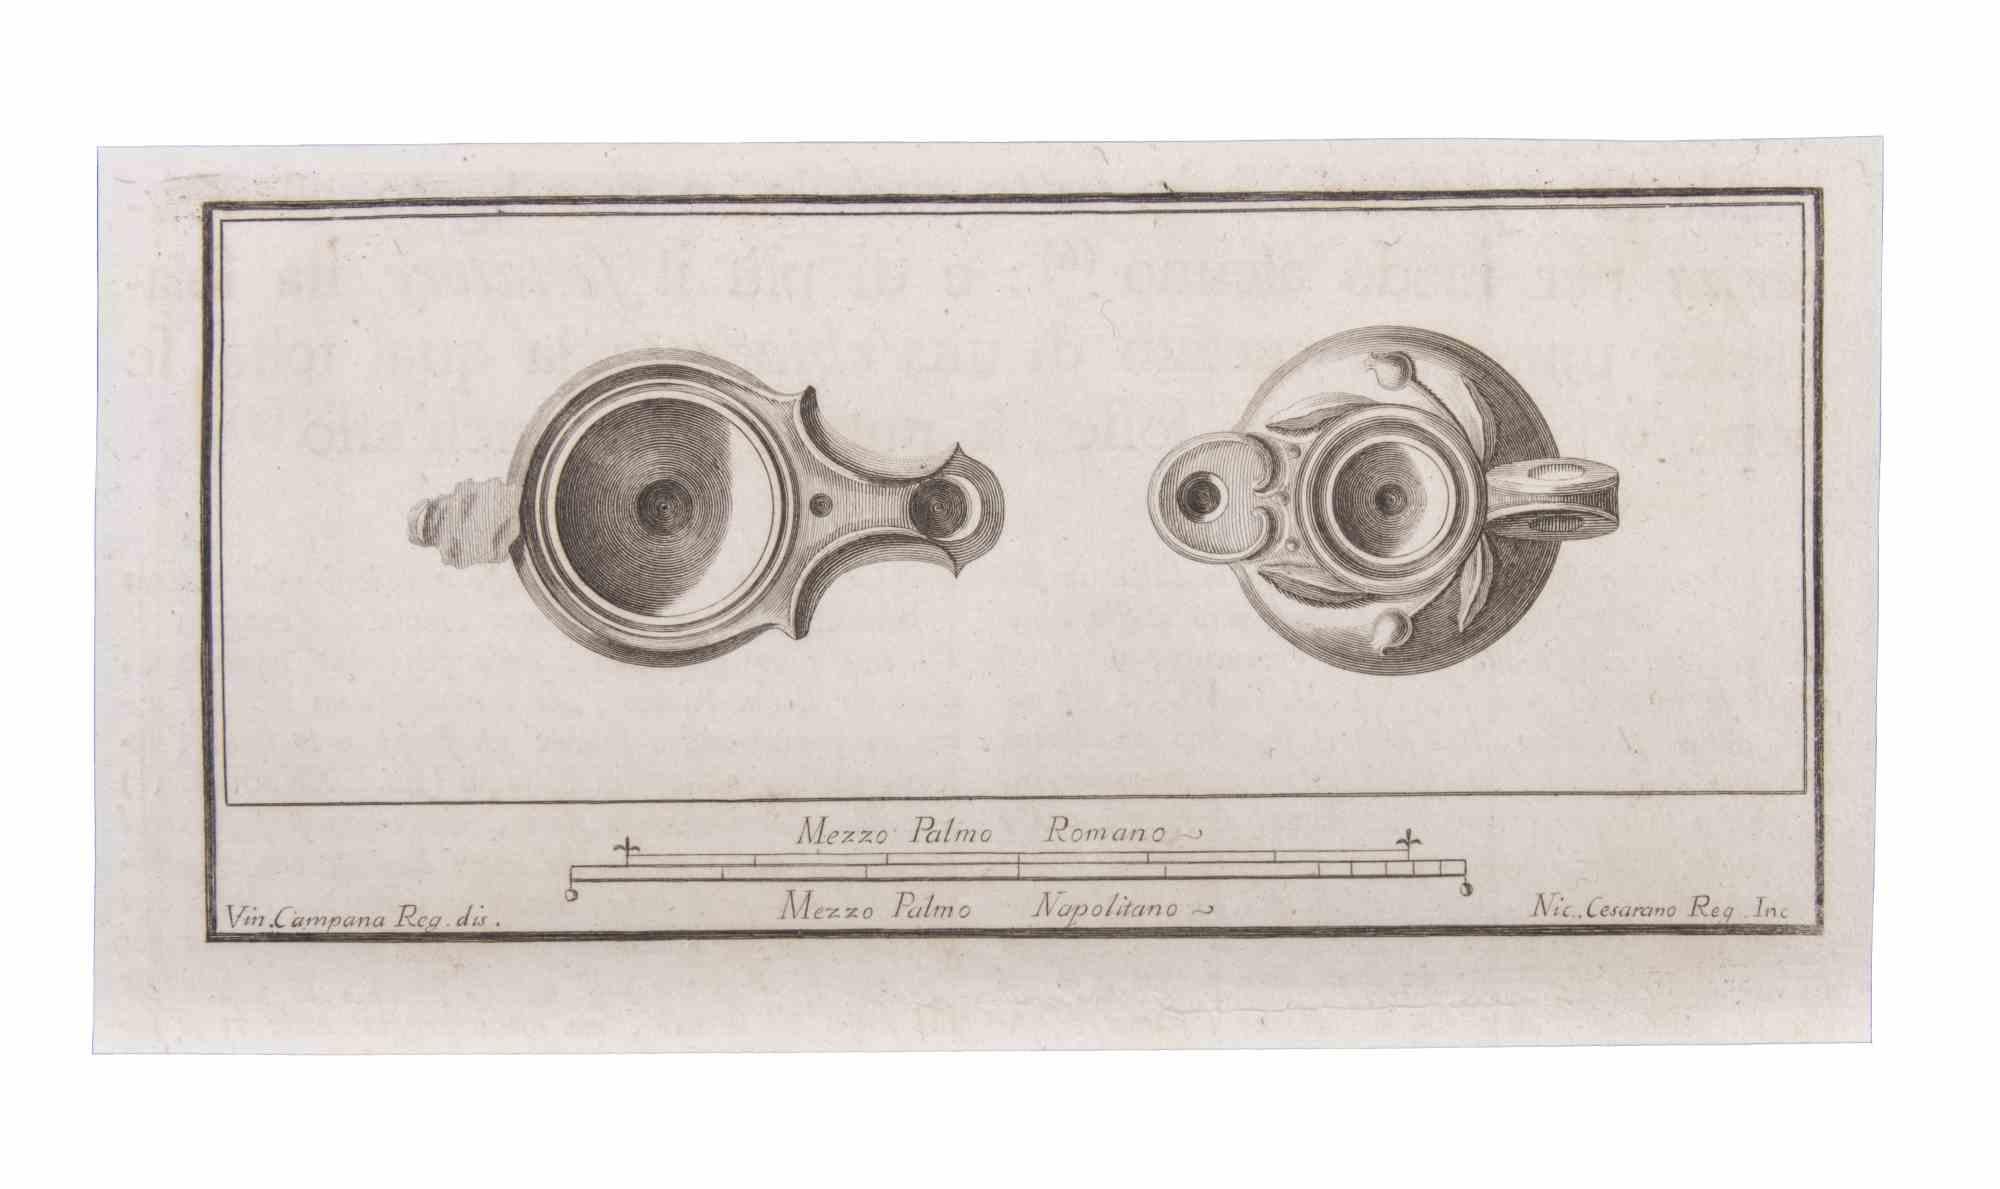 Oil Lamp is an Etching realized by Niccolò Cesarano (1740-1815).

The etching belongs to the print suite “Antiquities of Herculaneum Exposed” (original title: “Le Antichità di Ercolano Esposte”), an eight-volume volume of engravings of the finds